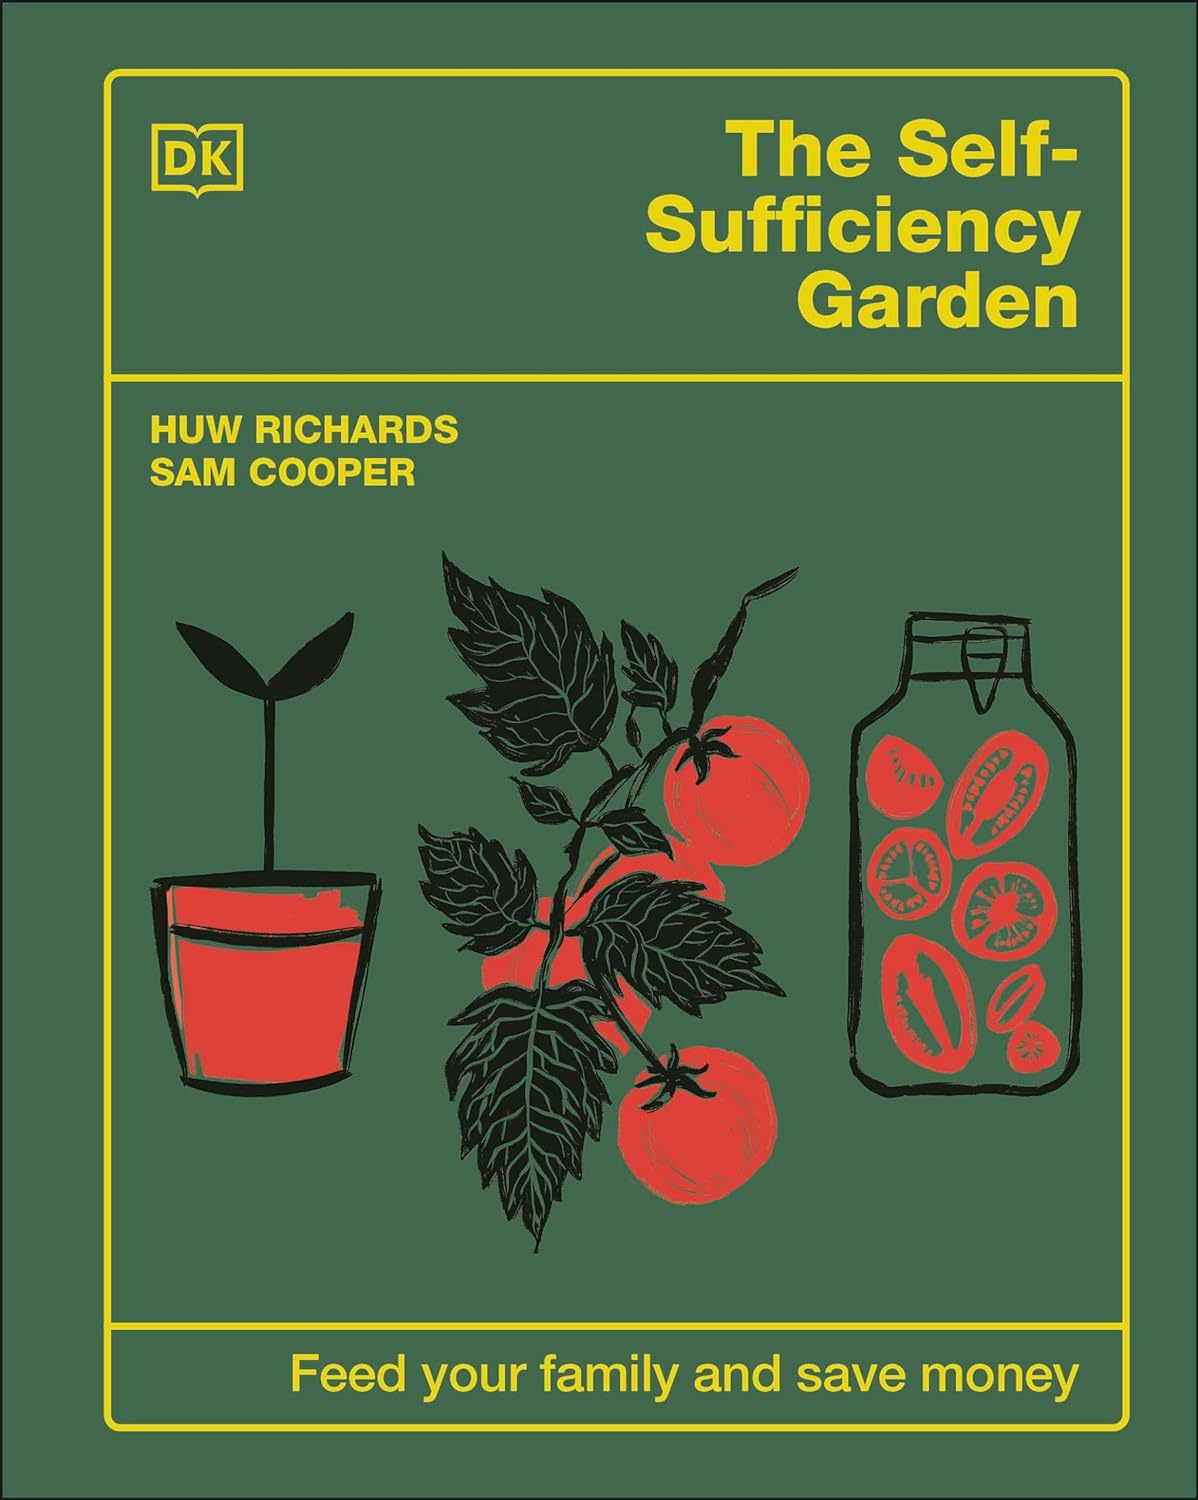 The Self-Sufficiency Garden: Feed Your Family and Save Money by Huw Richards